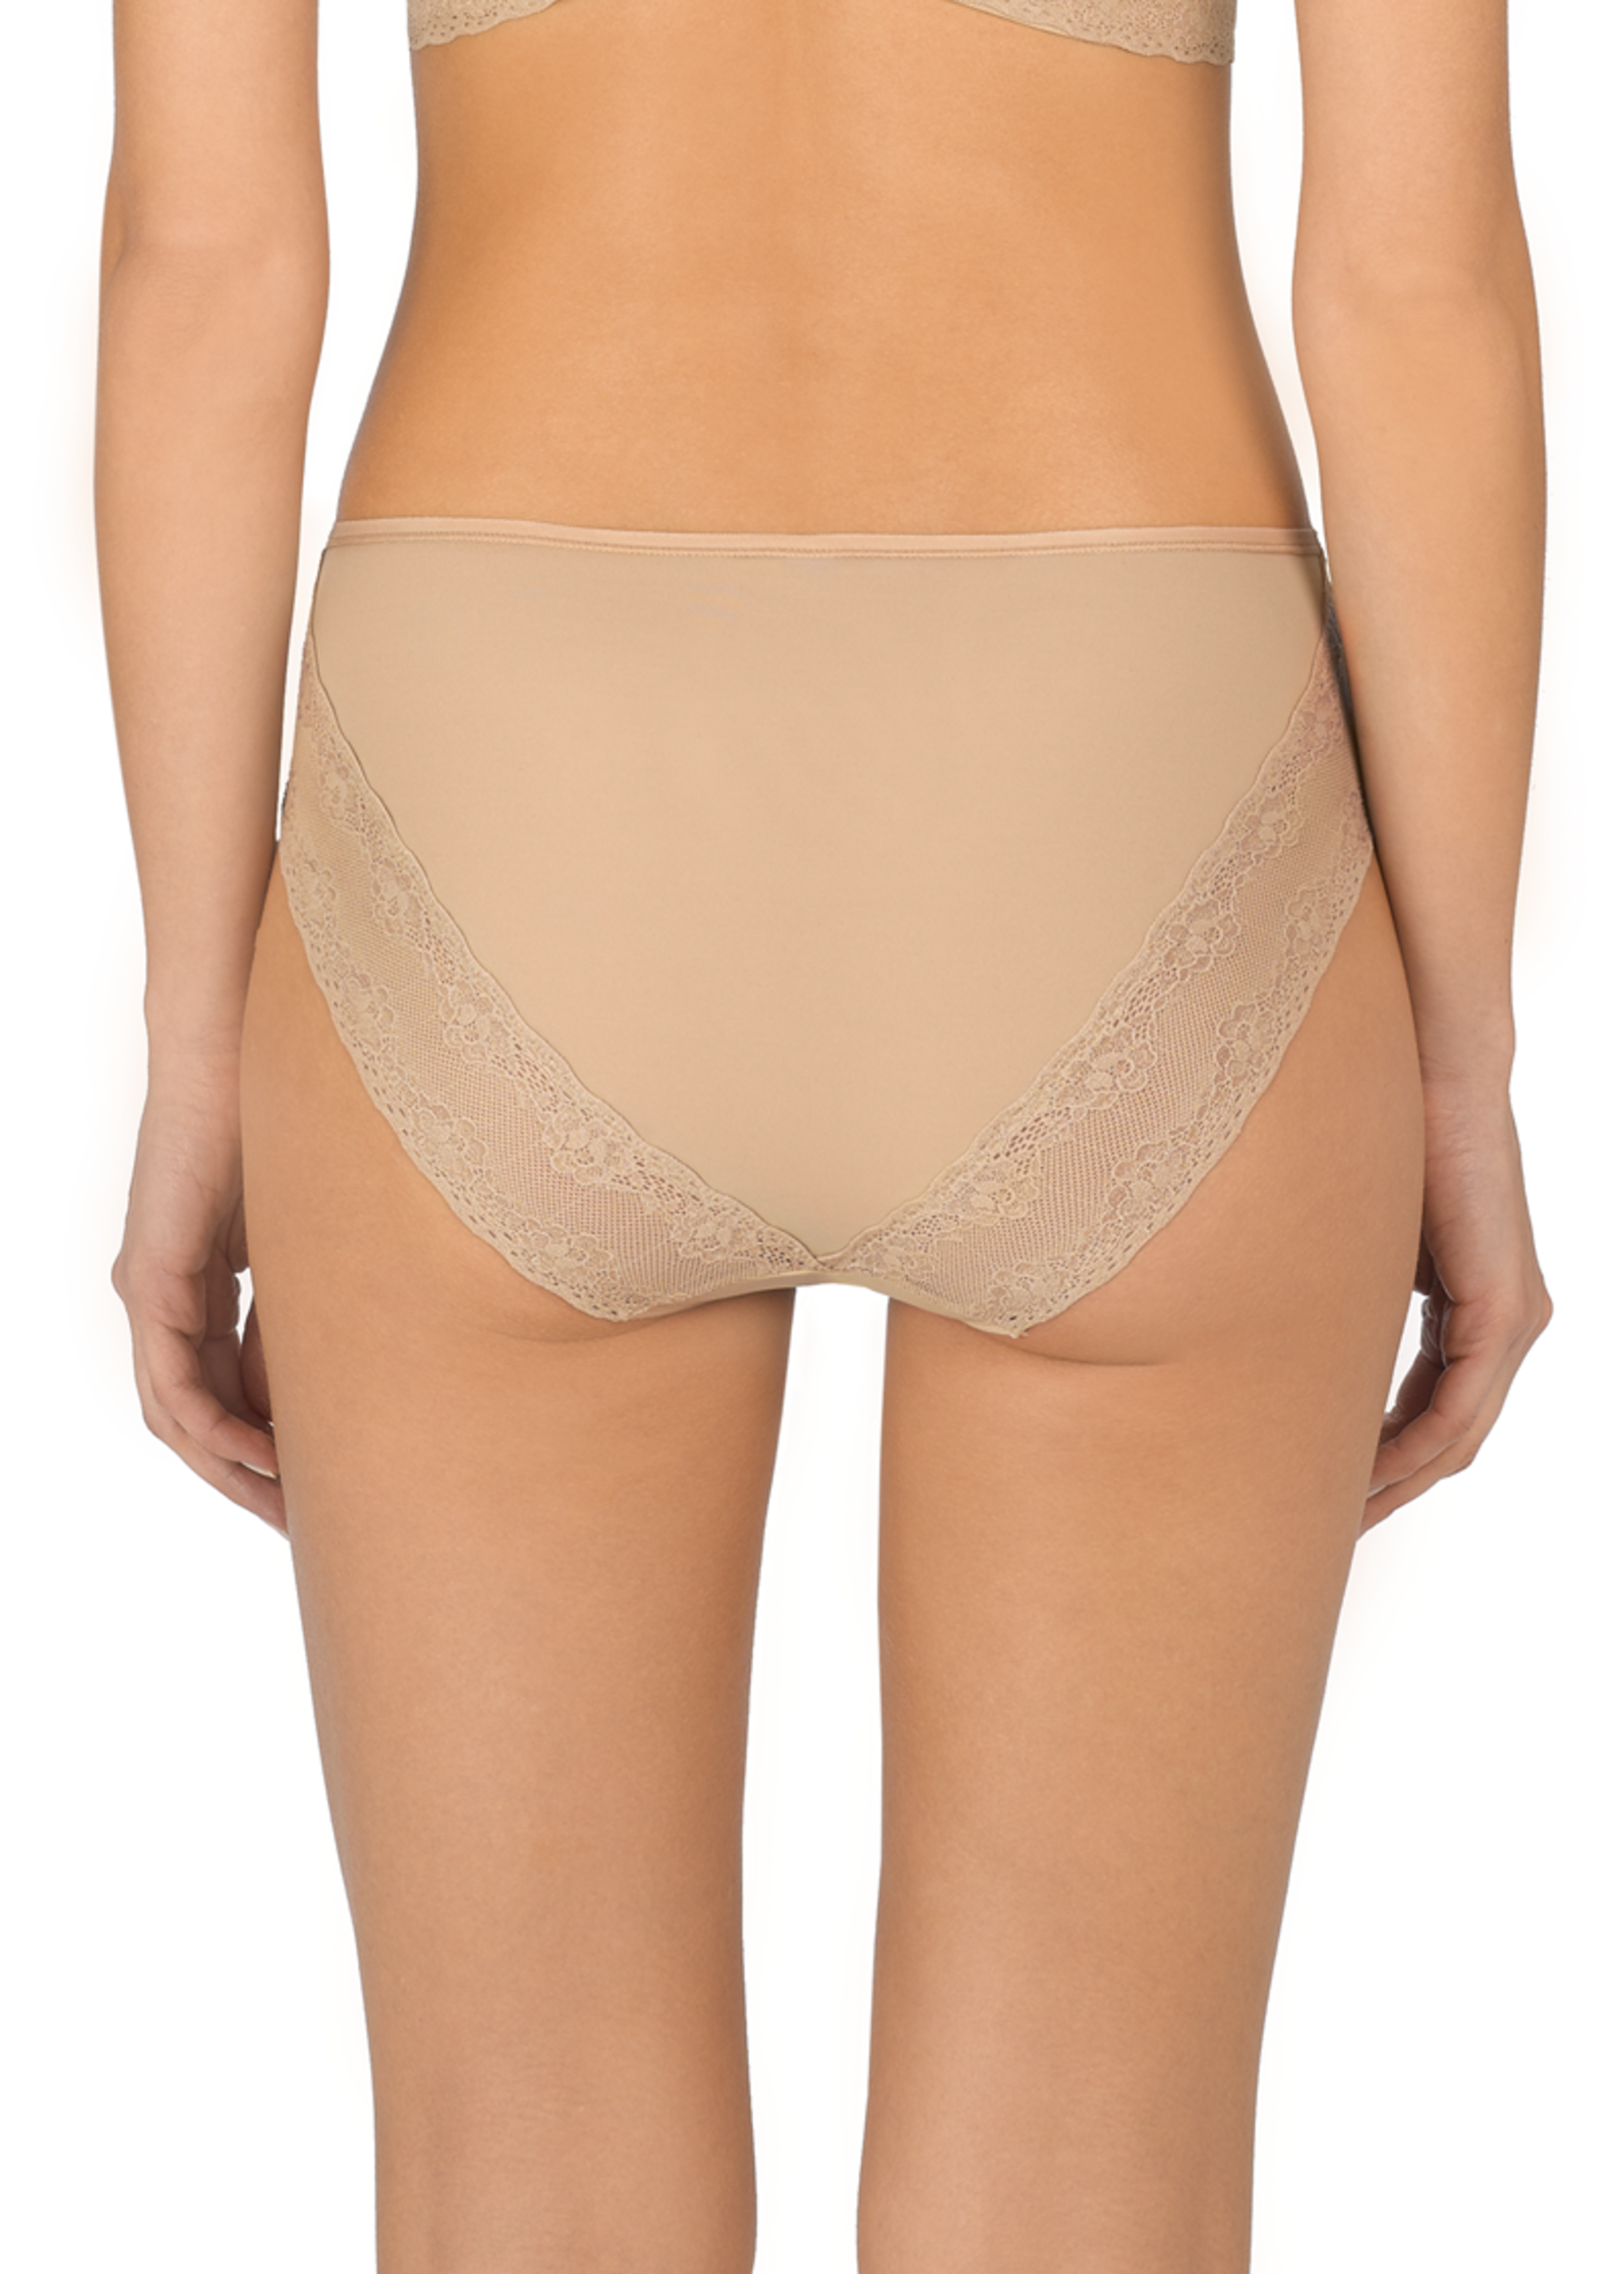 Natori Bliss Perfection One-Size French Cut Brief - Cafe